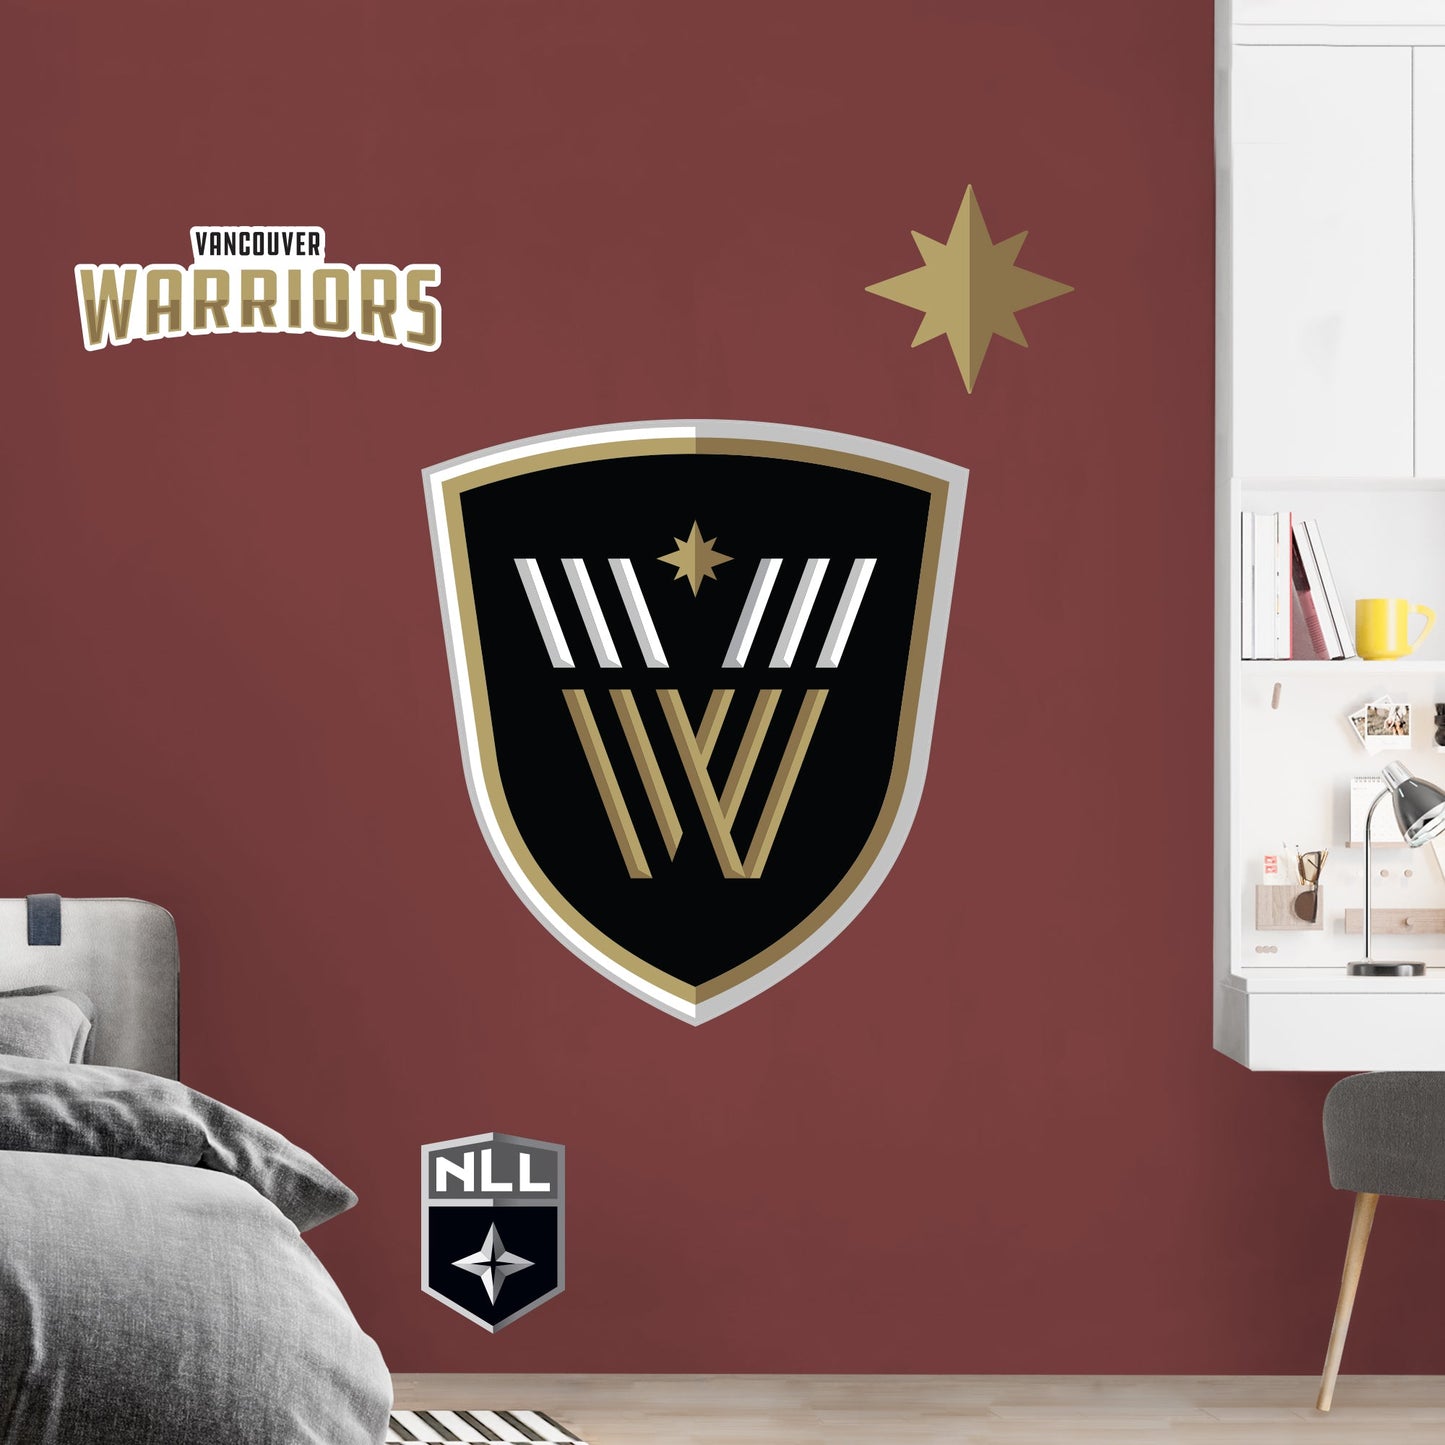 Vancouver Warriors:   Logo        - Officially Licensed NLL Removable     Adhesive Decal